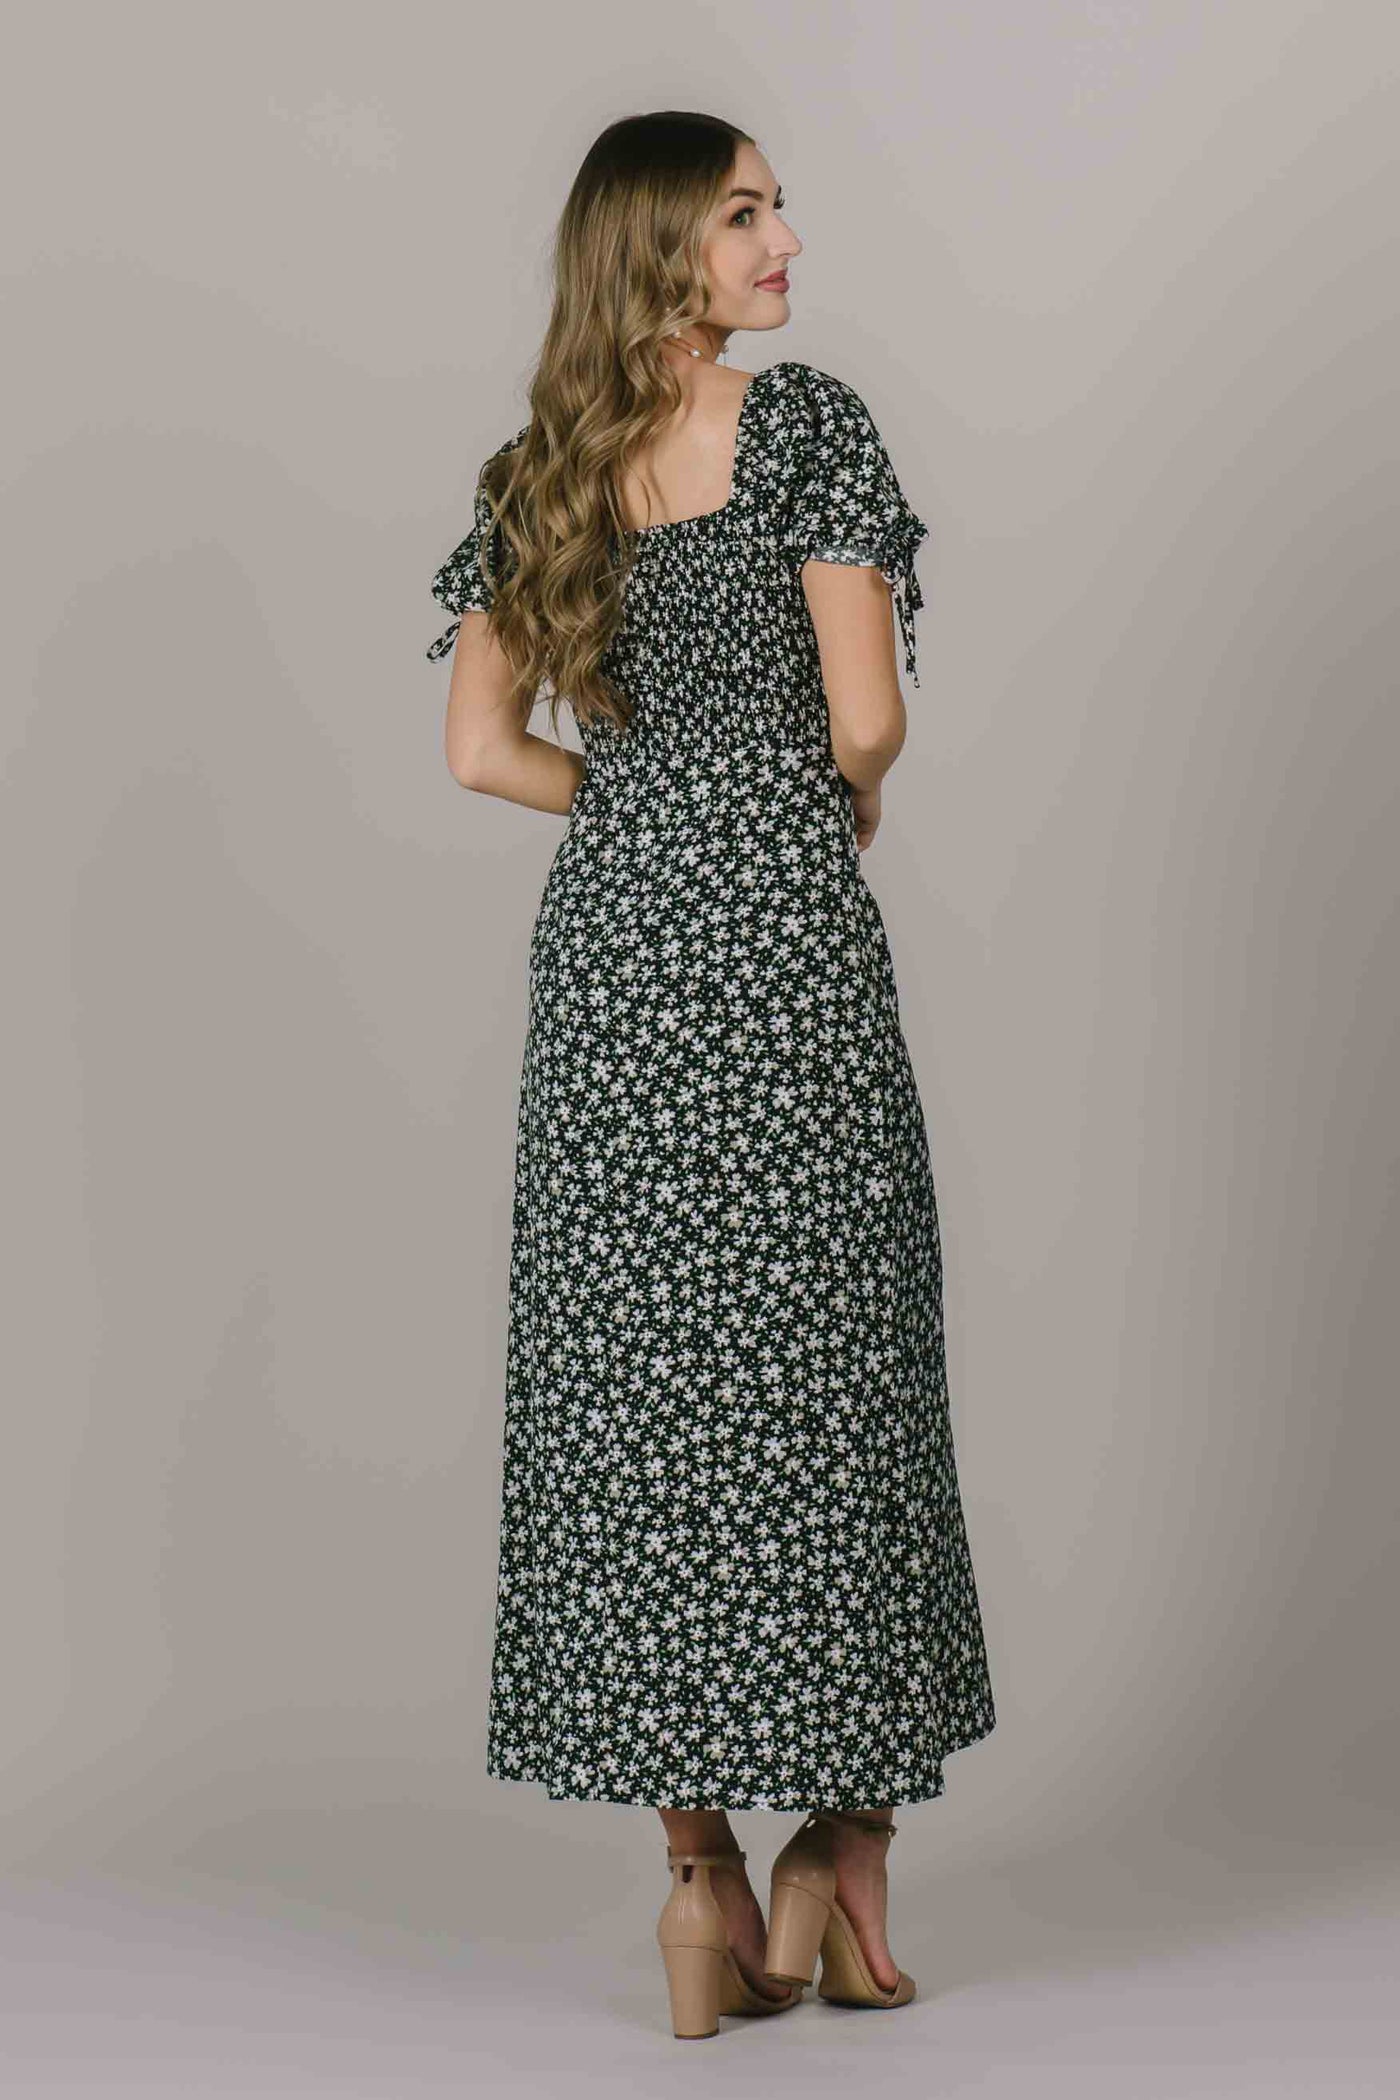 The back of a modest dress with a white floral pattern square back neckline, and puff sleeves with a bow.